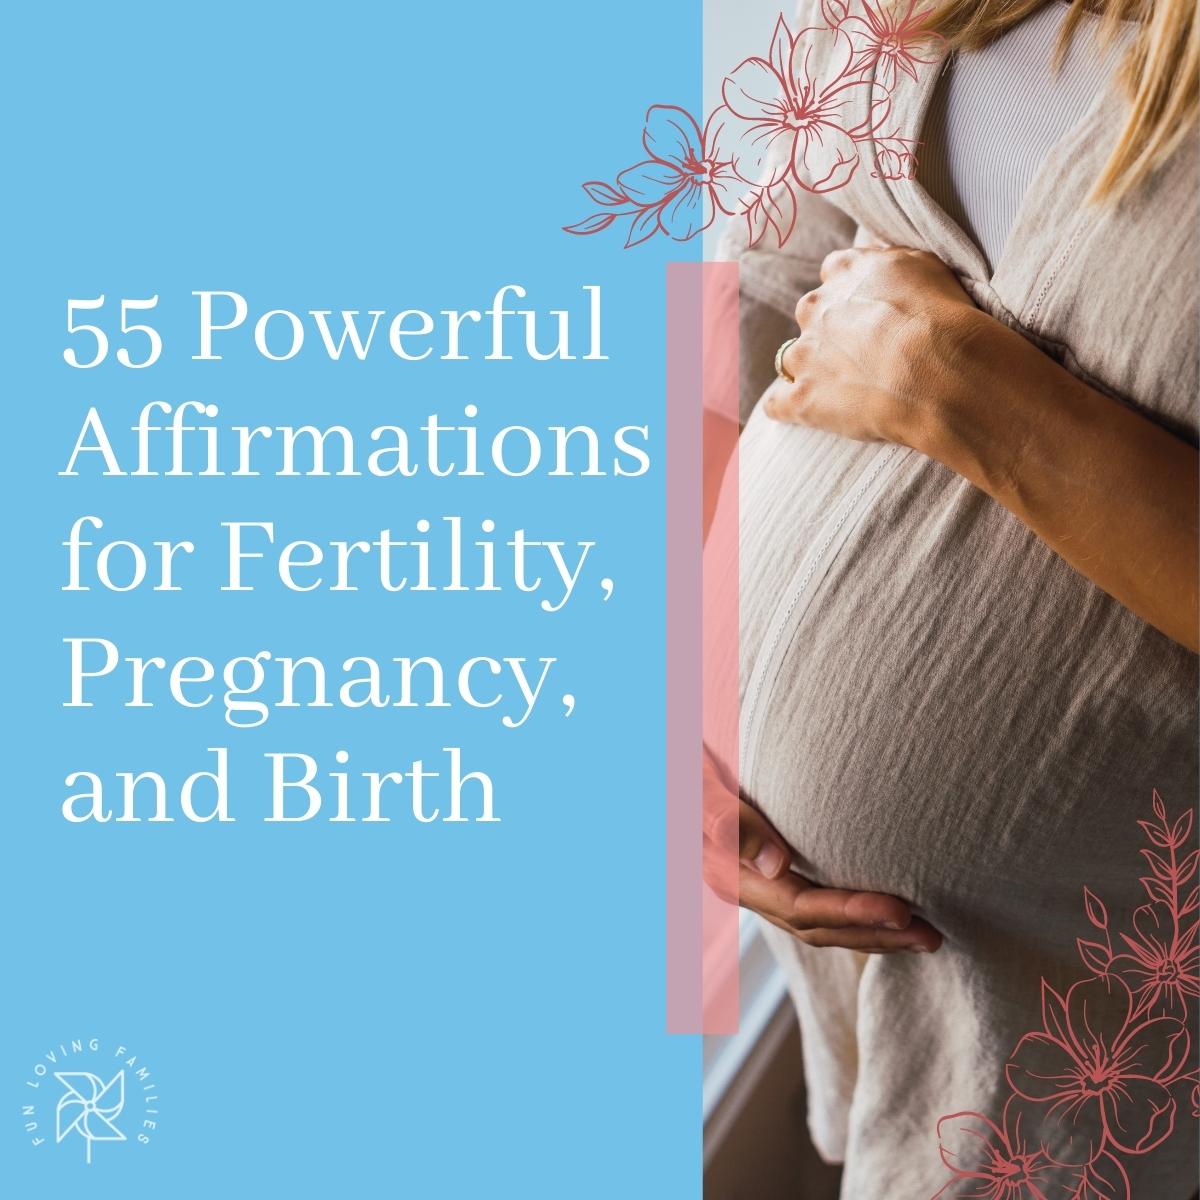 Affirmations for Fertility, Pregnancy, and Birth